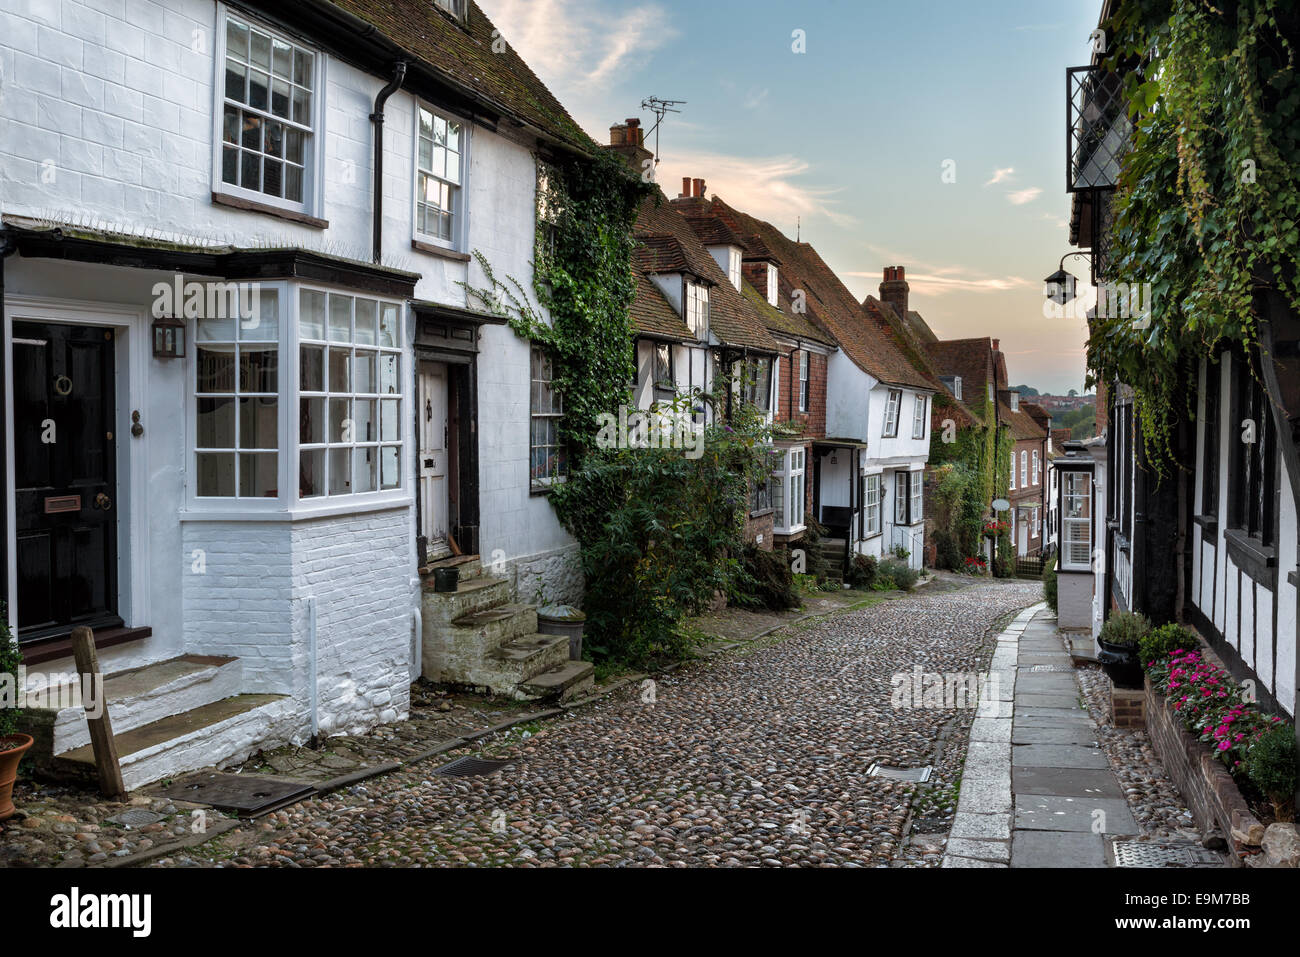 Beautiful old cottages on a cobbled street in Rye, East Sussex Stock Photo